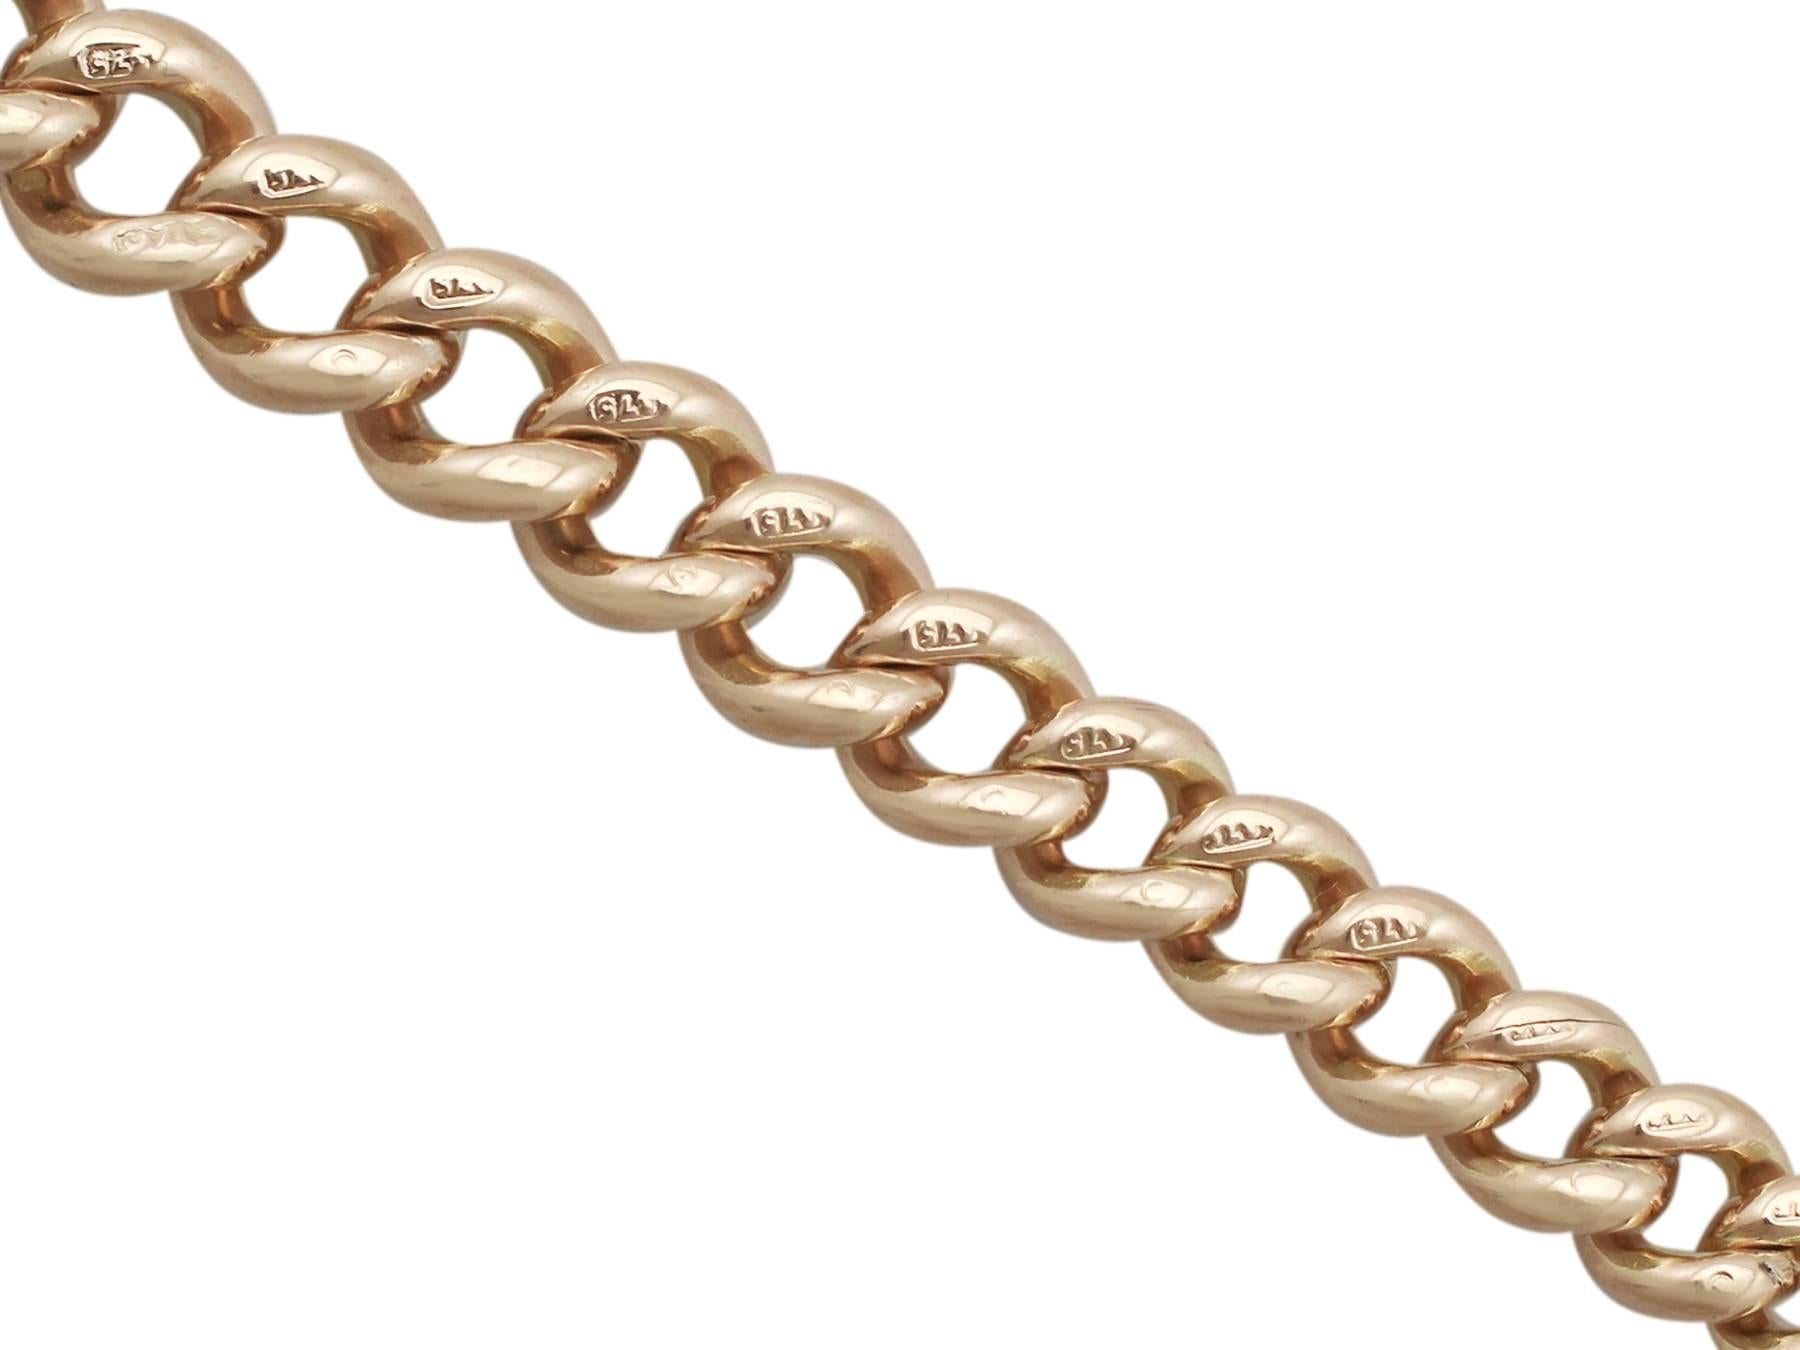 An exceptional and impressive antique 9 karat rose gold Albert watch chain and fob; part of our diverse antique jewelry and estate jewelry collections

This exceptional, fine and impressive 1920's Albert chain has been crafted in 9 k rose